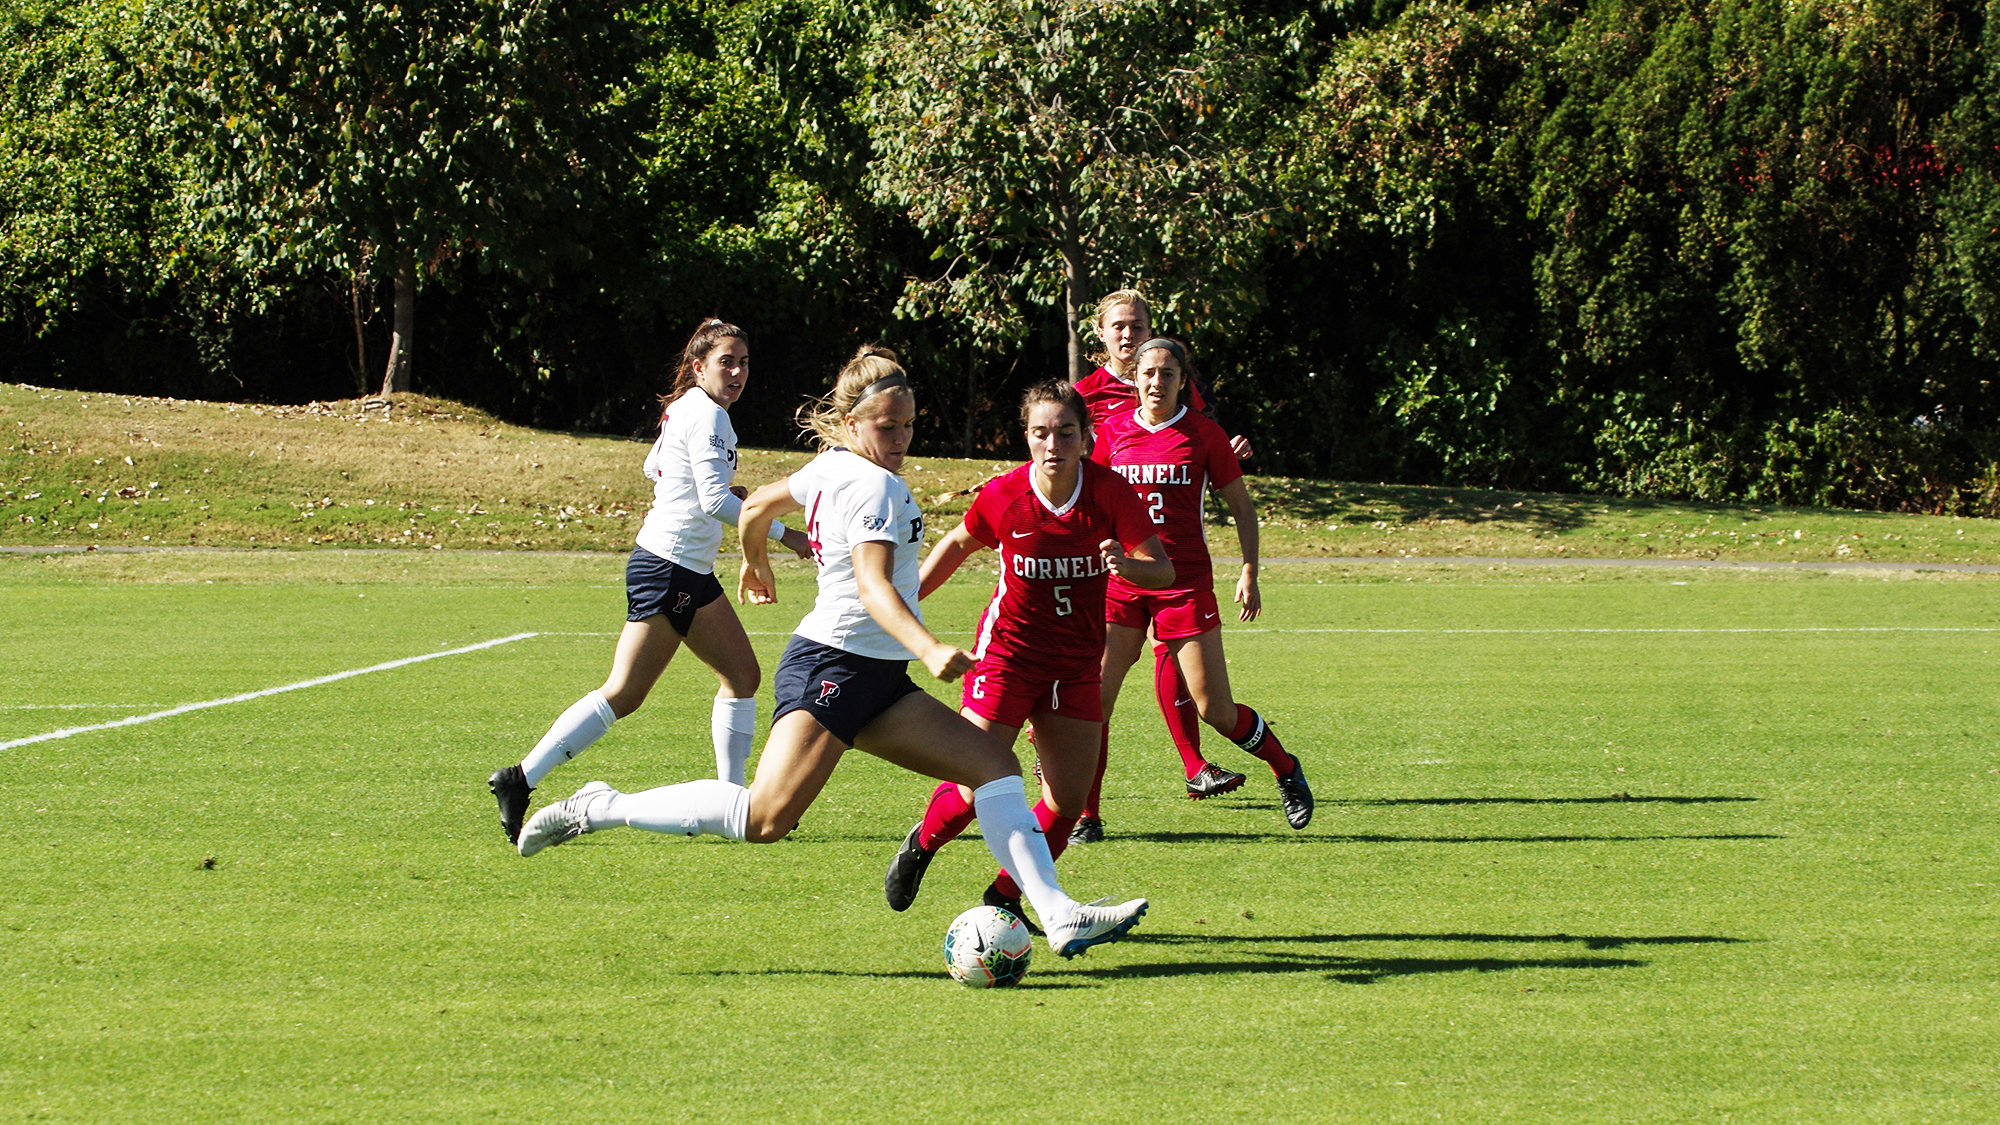 A member of the women's soccer team makes a move on a defender against Cornell.